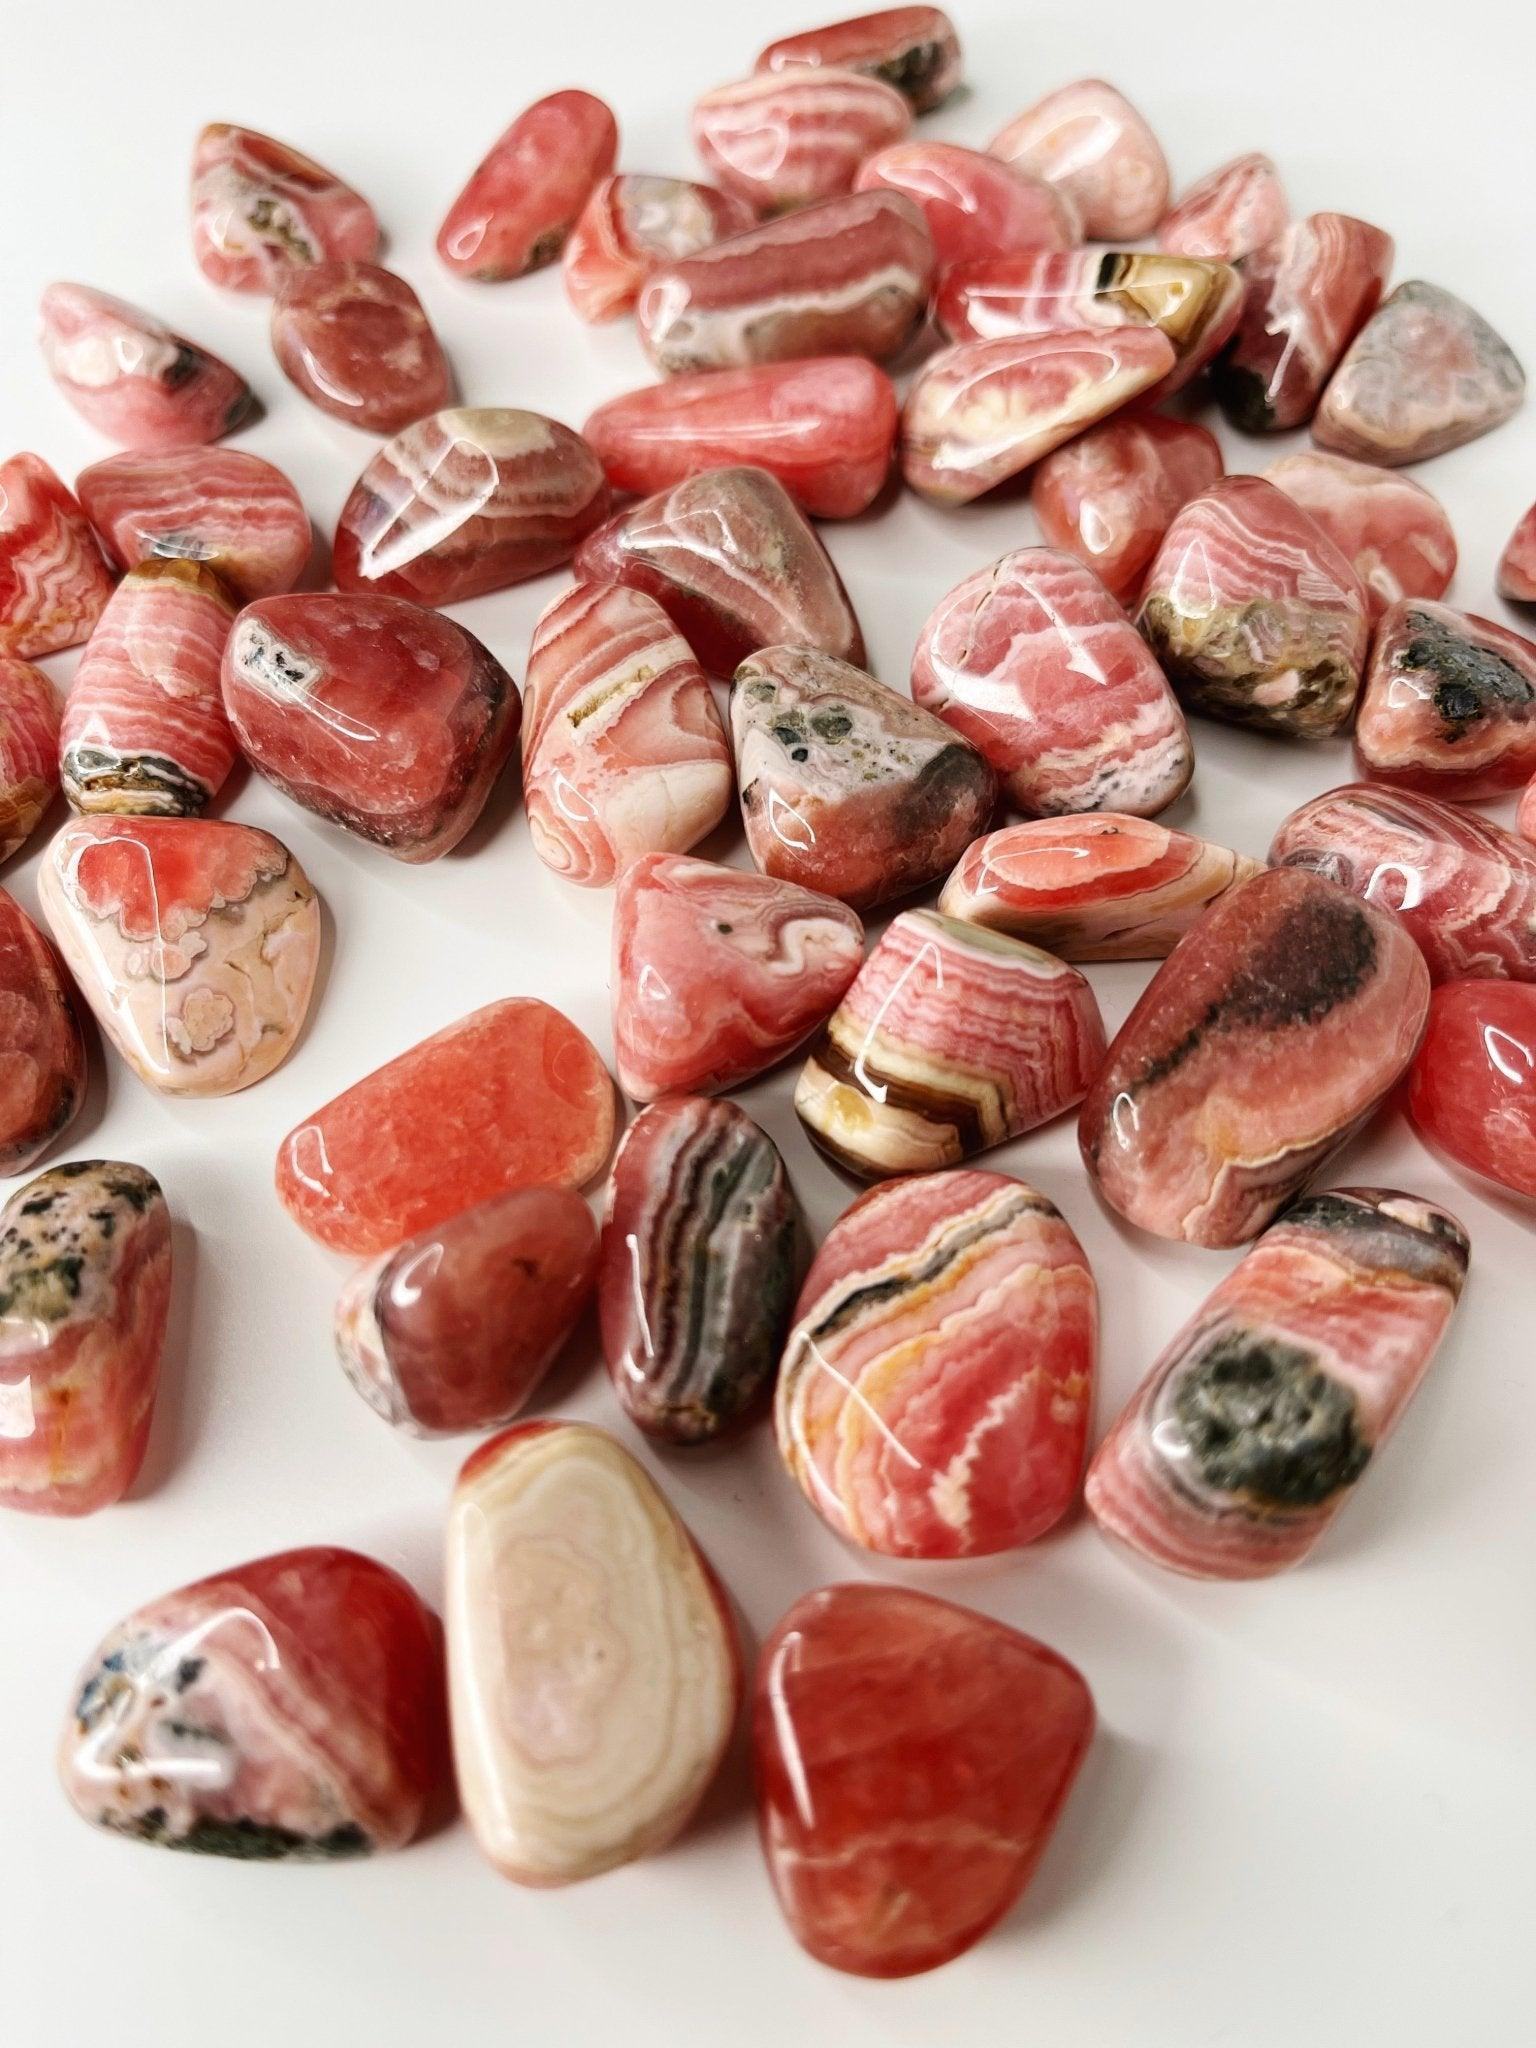 RHODOCHROSITE TUMBLE - 33 bday, bulk, end of year sale, flash sale, holiday sale, love gift bundle, new year sale, pocket crystal, rhodochrosite, spring equinox, tumble, valentine's day - The Mineral Maven